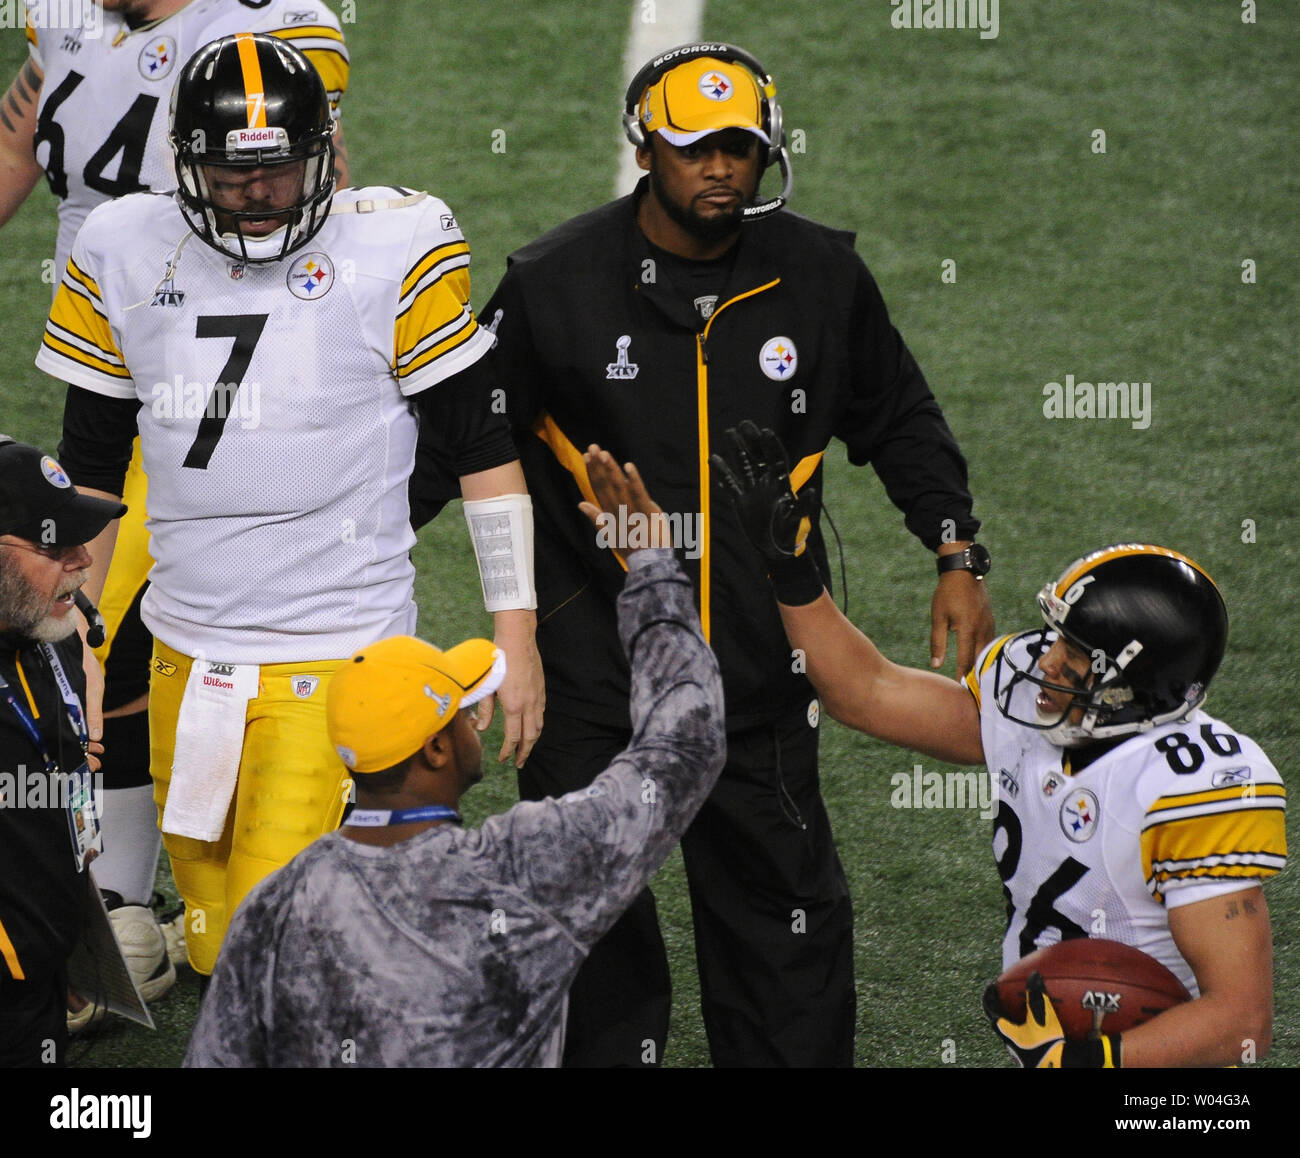 Pittsburgh Steelers Head Coach Mike Tomlin pats Pittsburgh Steelers quarterback Ben Roethlisberger on the back and goes to congratulate wide receiver Hines Ward Ward caught a second quarter touchdown pass against the Green Bay Packers during Super Bowl XLV at Cowboys Stadium in Arlington, Texas on February 6, 2011.    UPI/Jon Soohoo Stock Photo